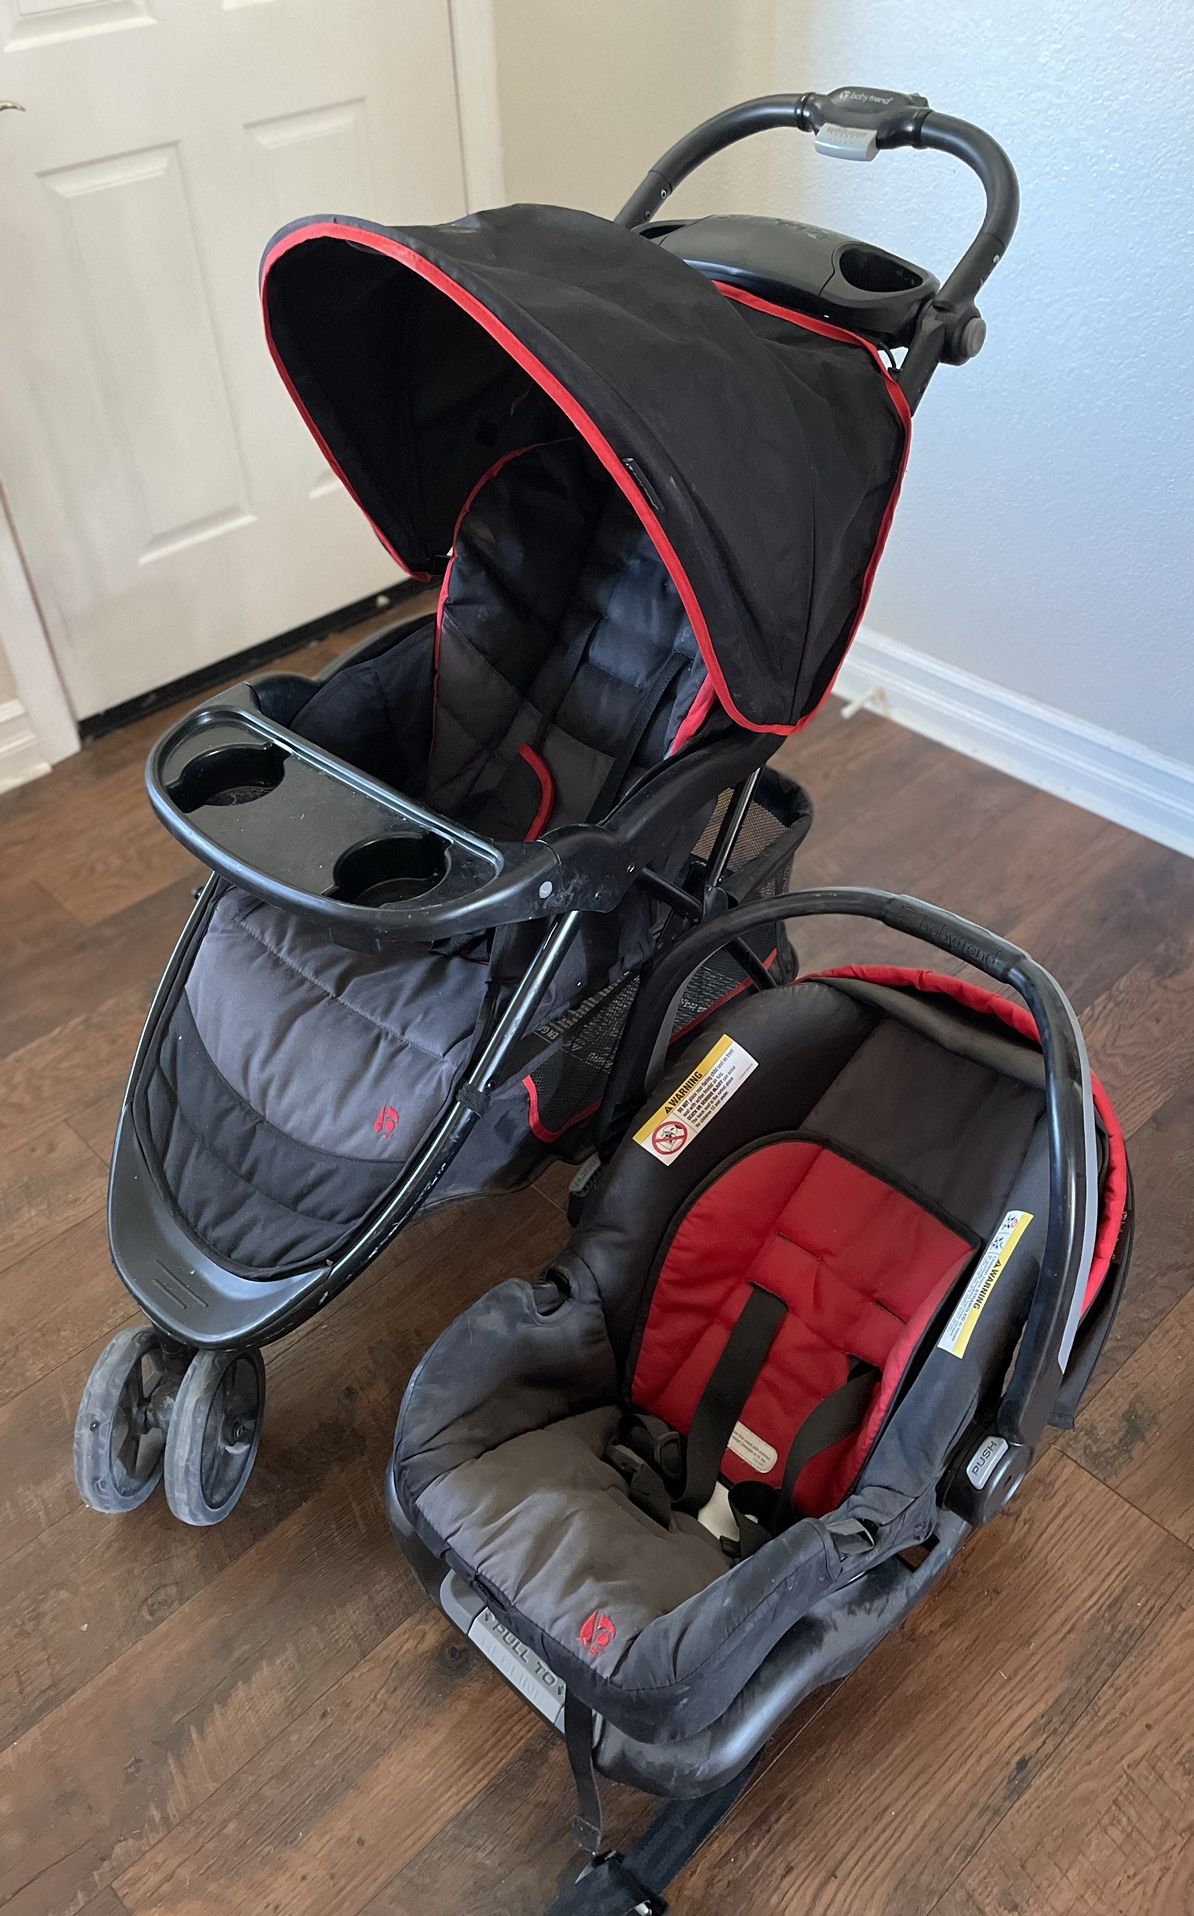 Babytrend Stroller AND  Car Seat That Has Base For Car 